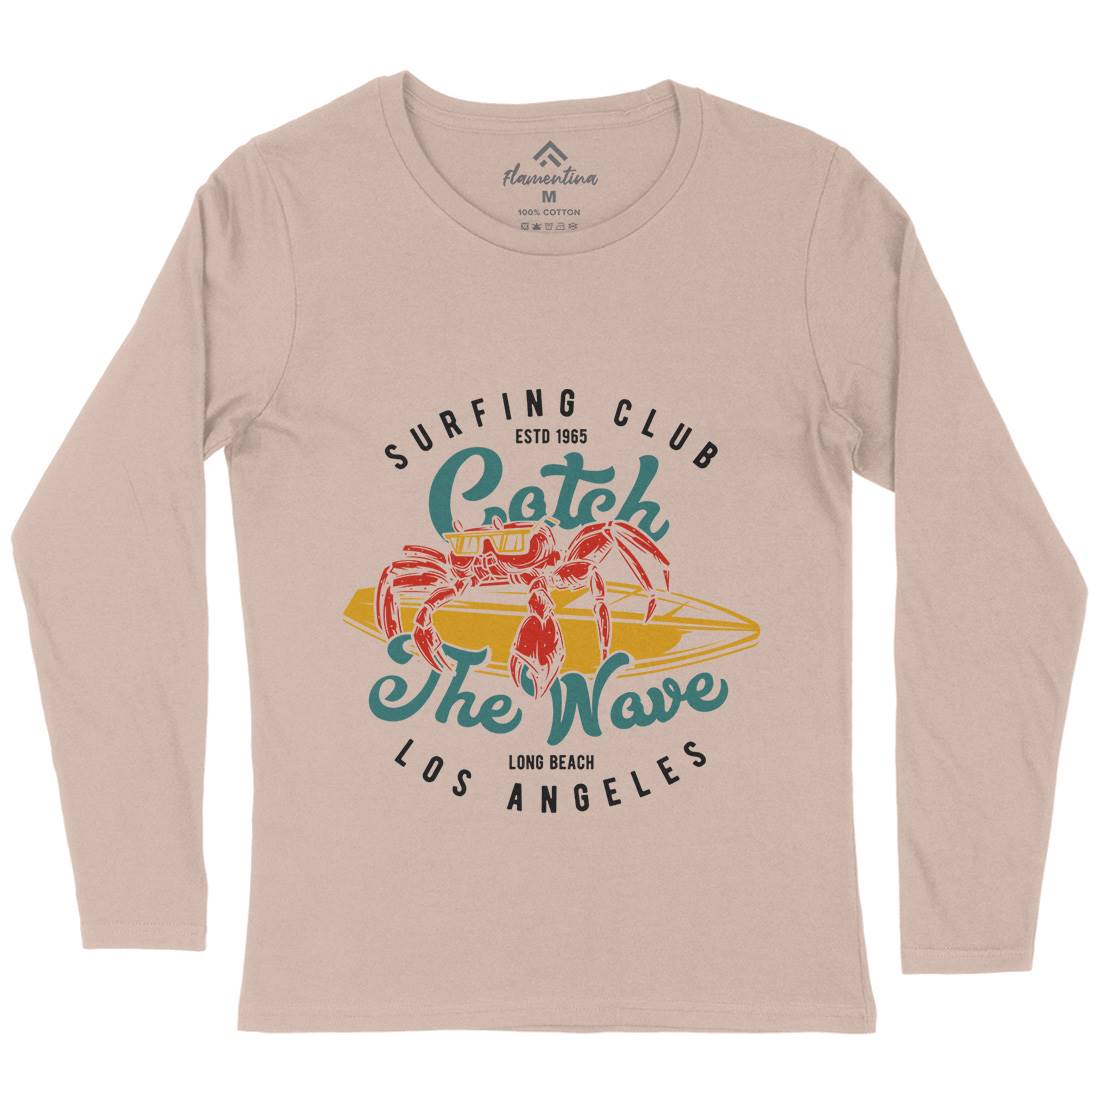 Catch The Wave Surfing Womens Long Sleeve T-Shirt Surf B877